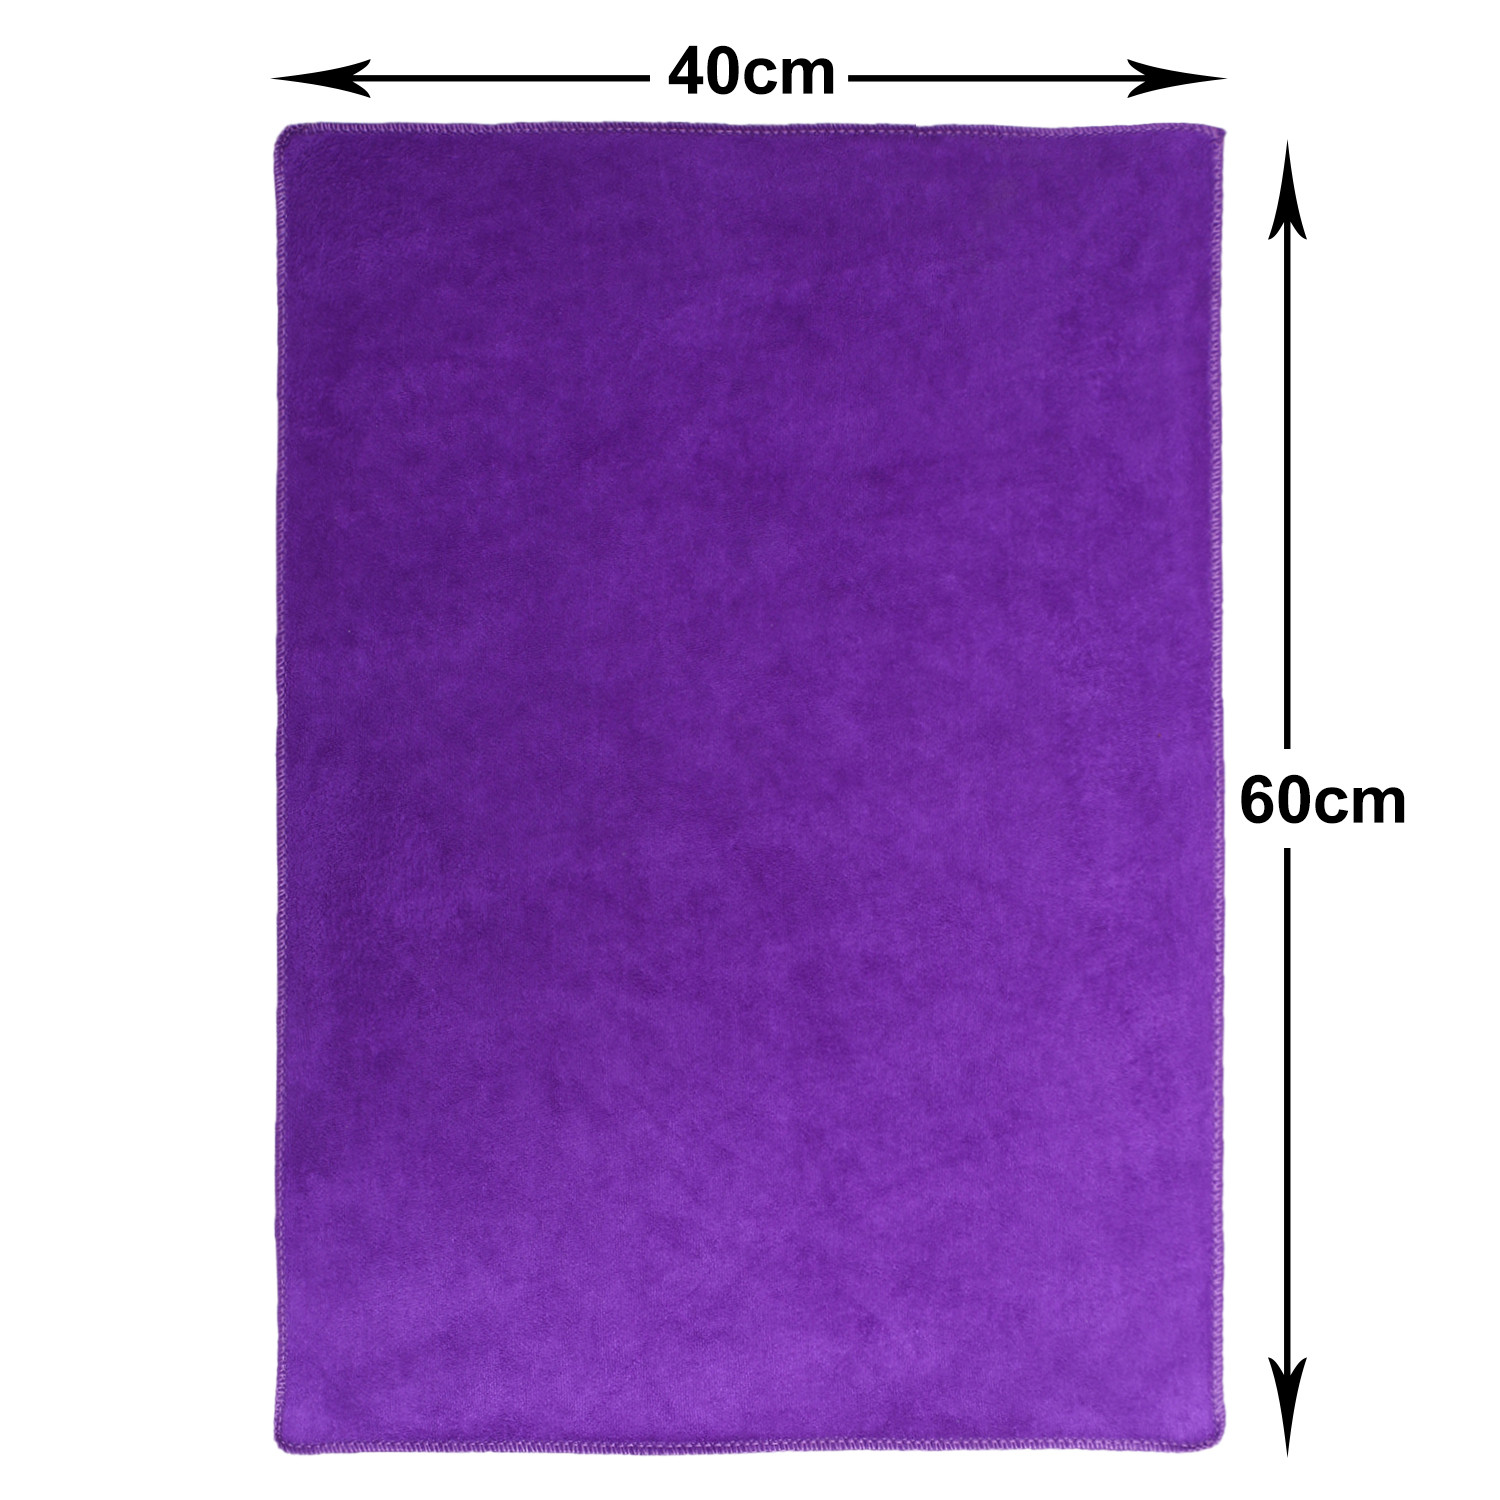 Kuber Industries Cleaning Cloths|Microfiber Highly Absorbent Wash Towels for Kitchen,Car,Window,24 x 16 Inch,Pack of 2 (Gray & Purple)